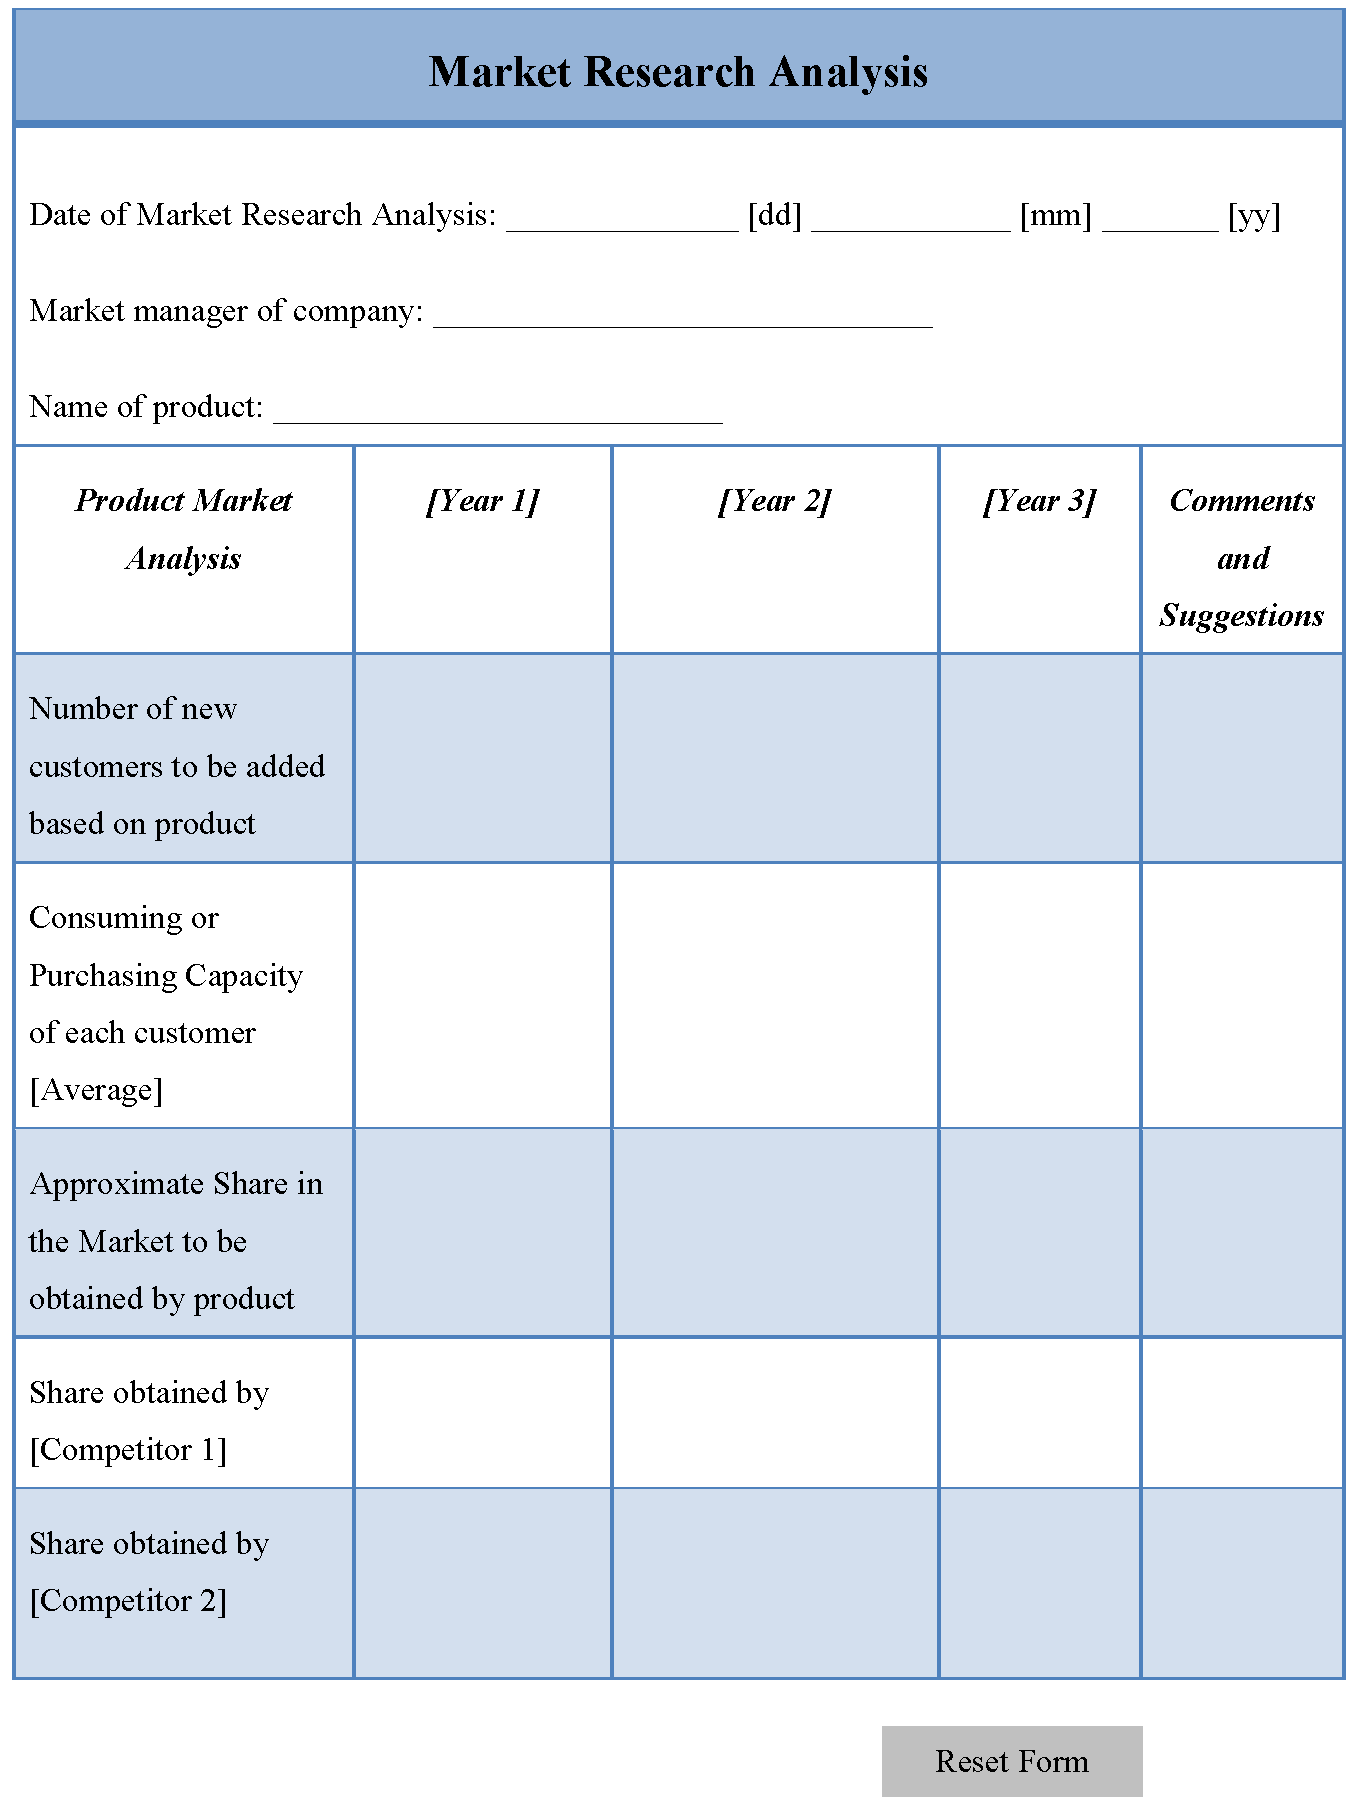 Market research analysis template